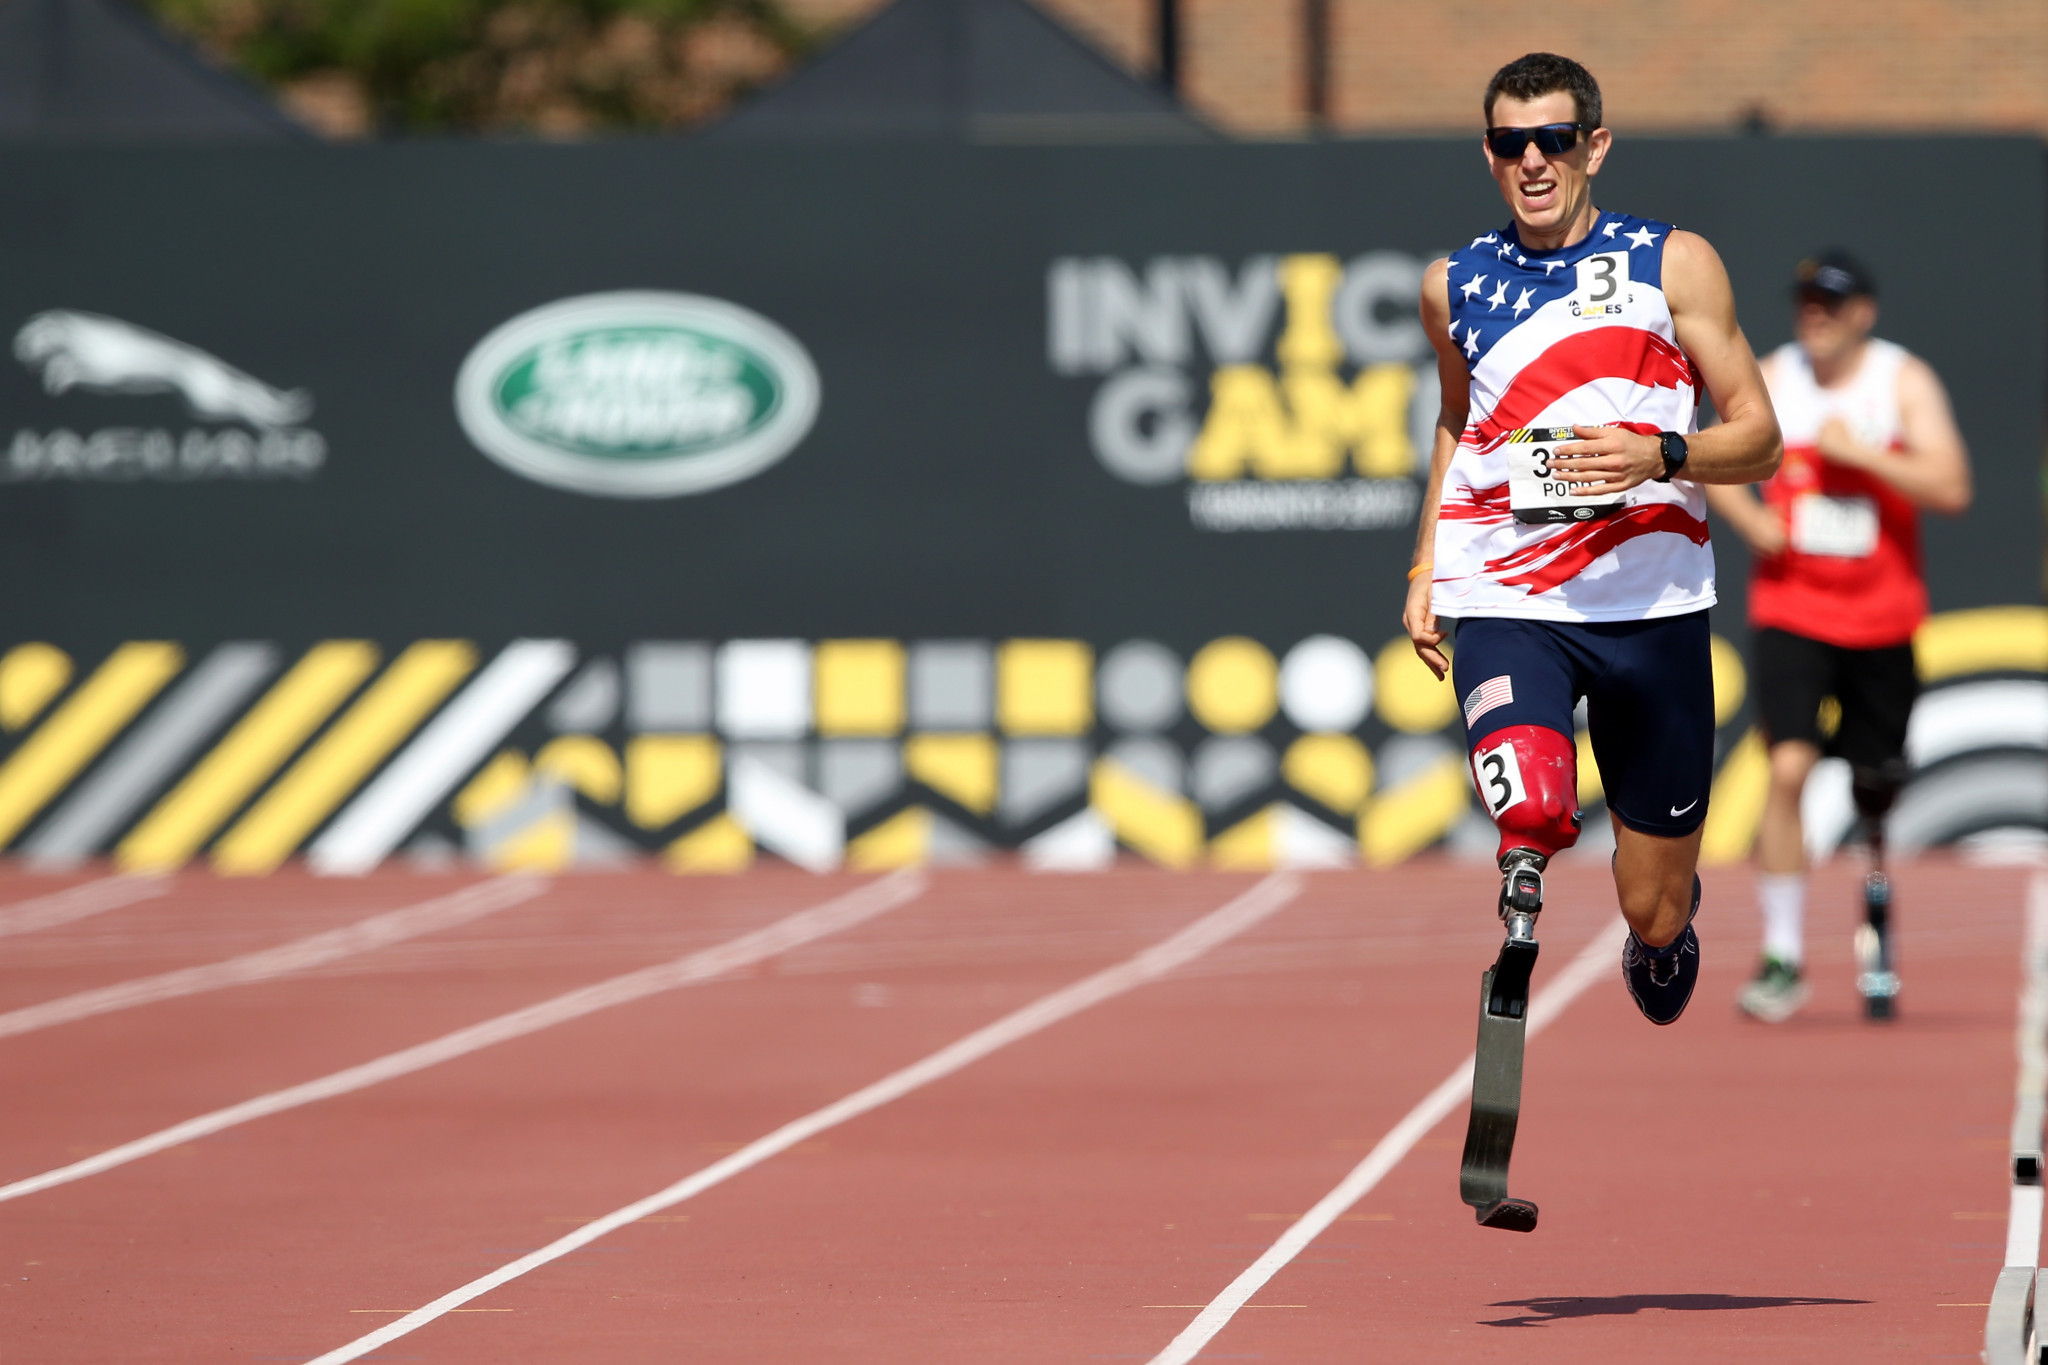 Adam Popp was among the United States' 12 athletics gold medallists today at the 2017 Invictus Games in Toronto ©Getty Images